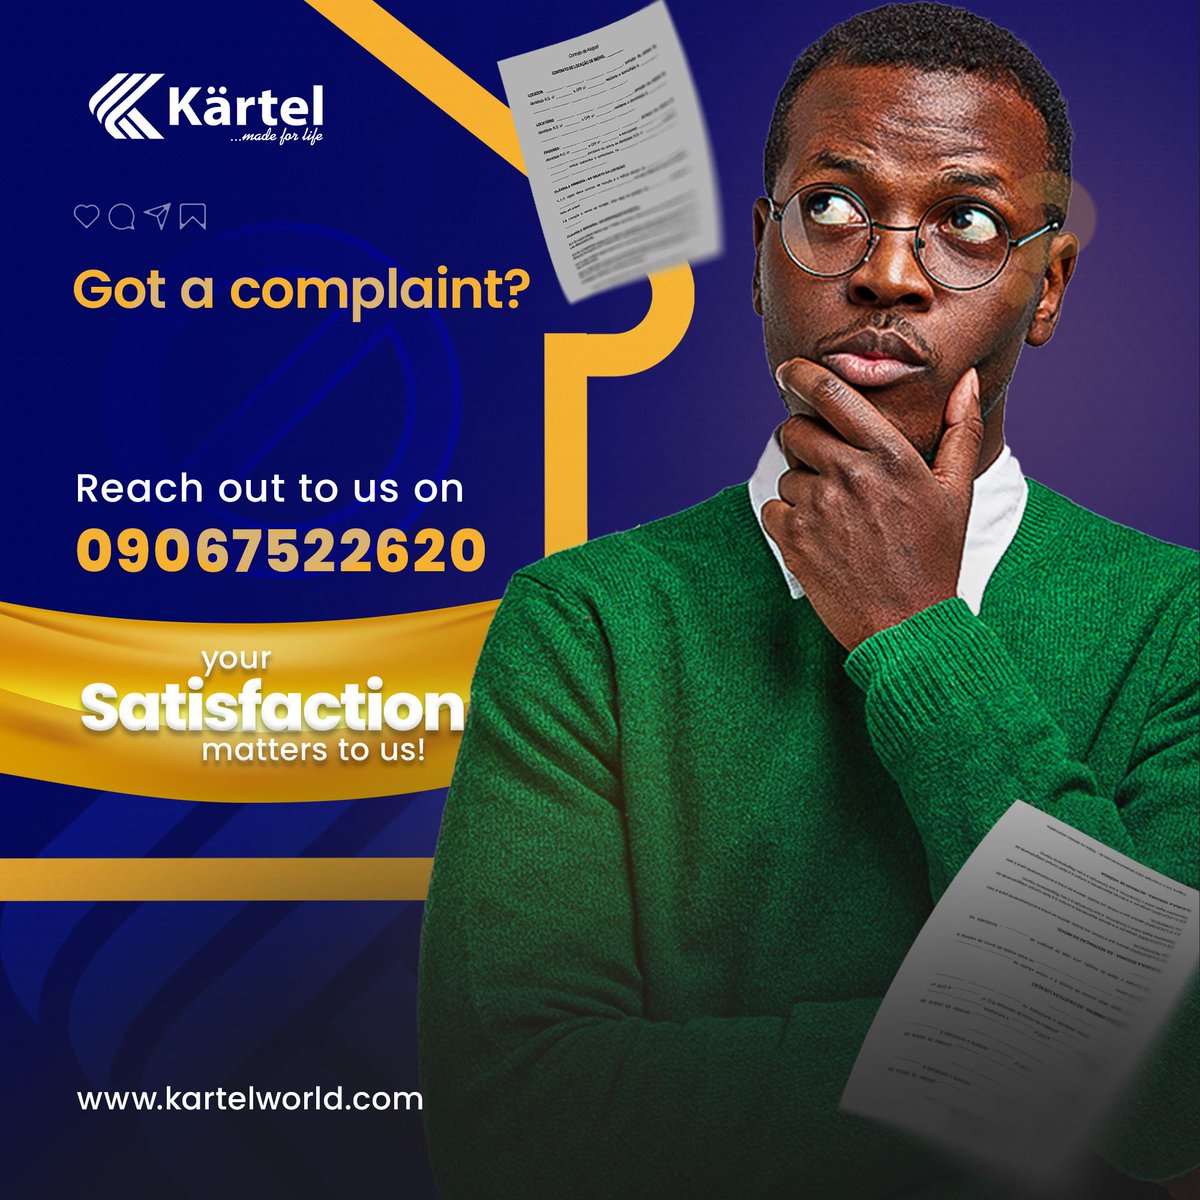 At Kärtel, we value your feedback and strive to provide excellent customer service. If you have any concerns or complaints, don’t hesitate to contact us at the number provided. Your satisfaction is our priority! #CustomerService #Feedback #Complaints #CustomerSatisfaction